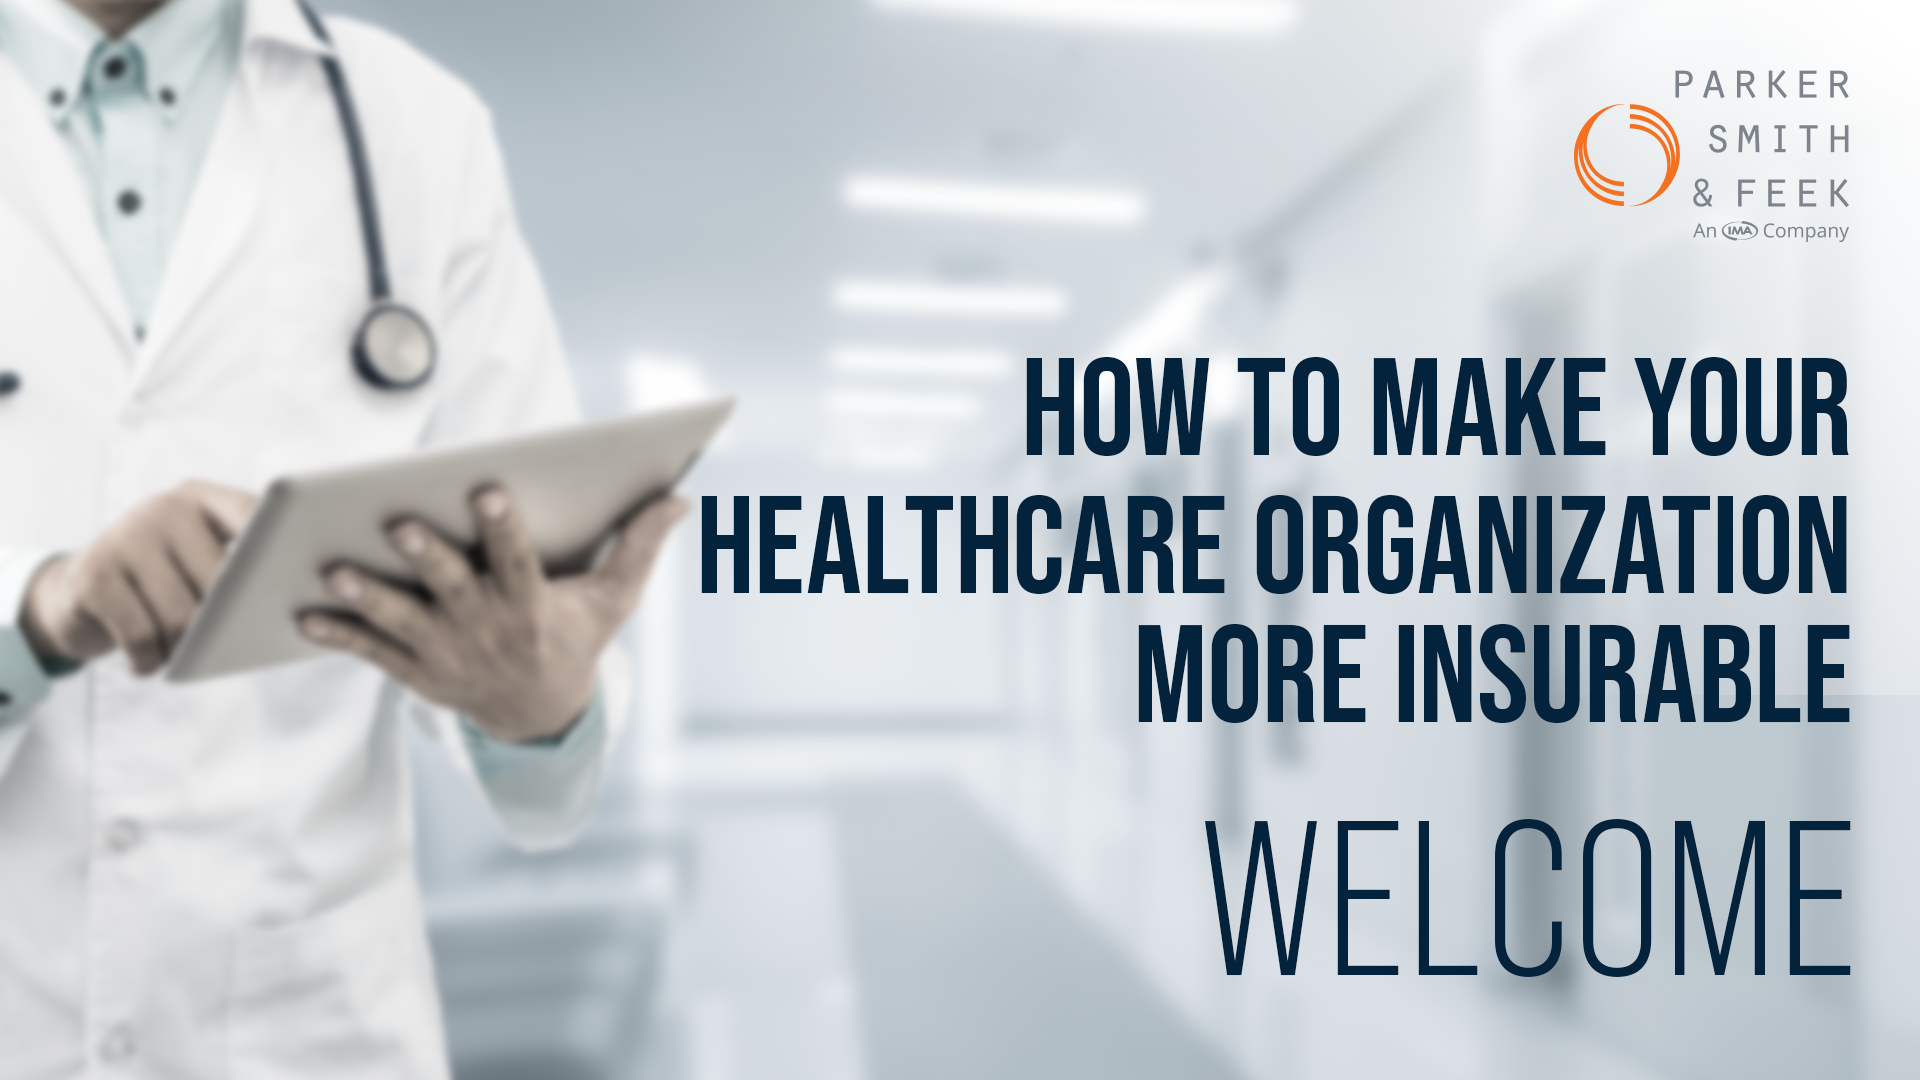 How to Make Your Healthcare Organization More Insurable